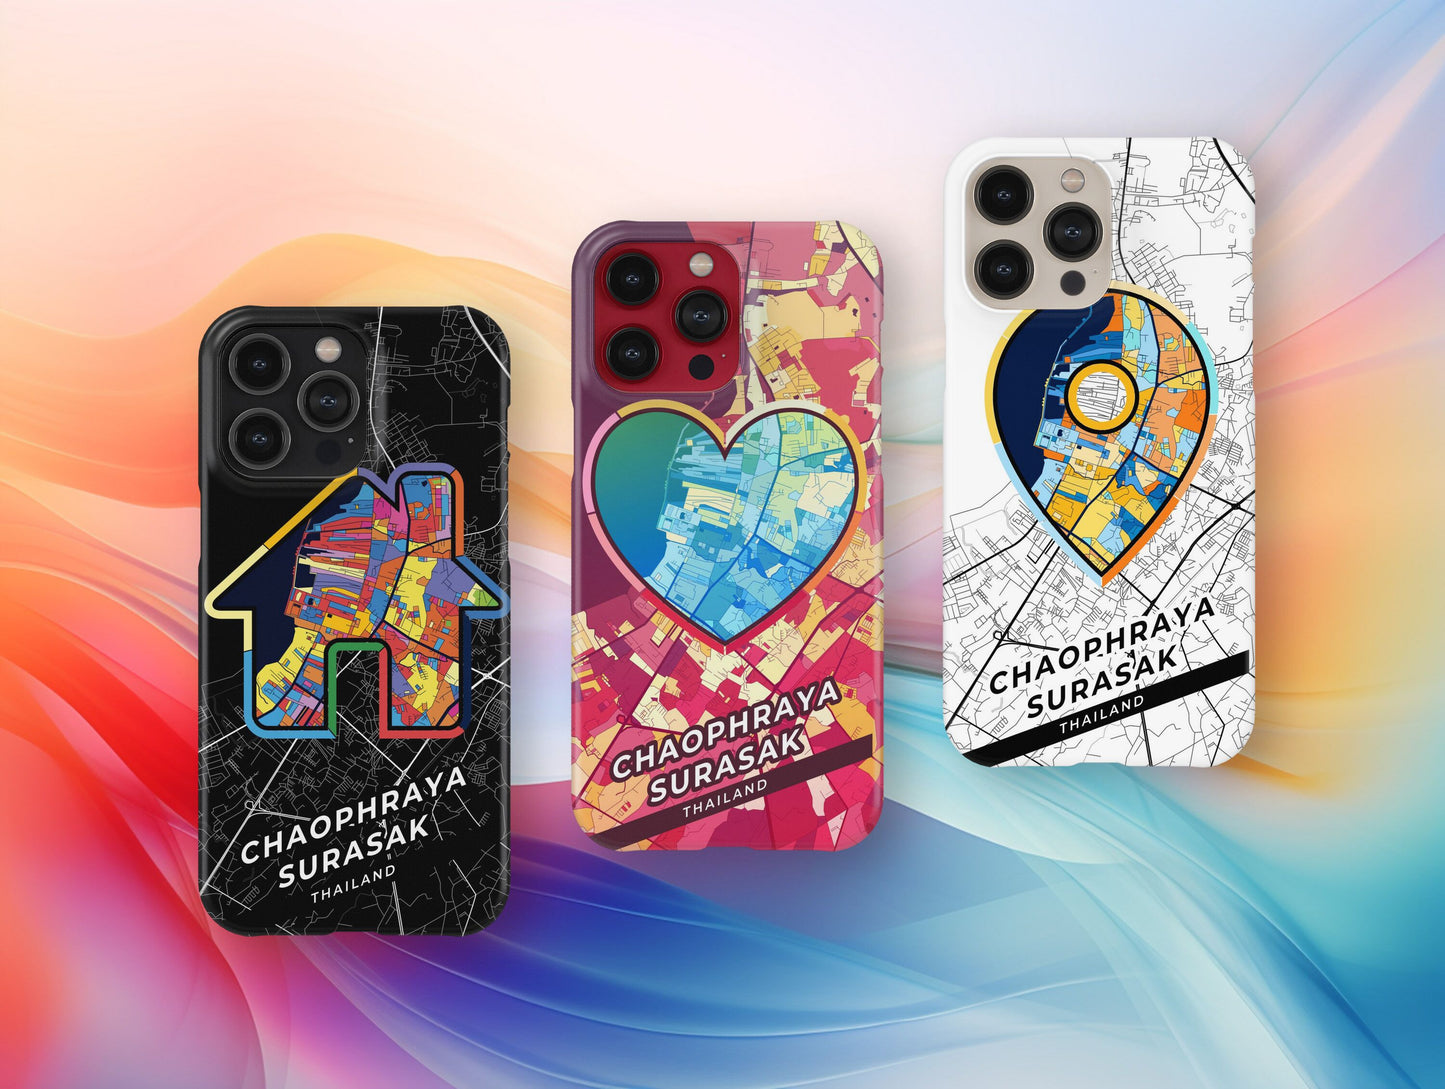 Chaophraya Surasak Thailand slim phone case with colorful icon. Birthday, wedding or housewarming gift. Couple match cases.